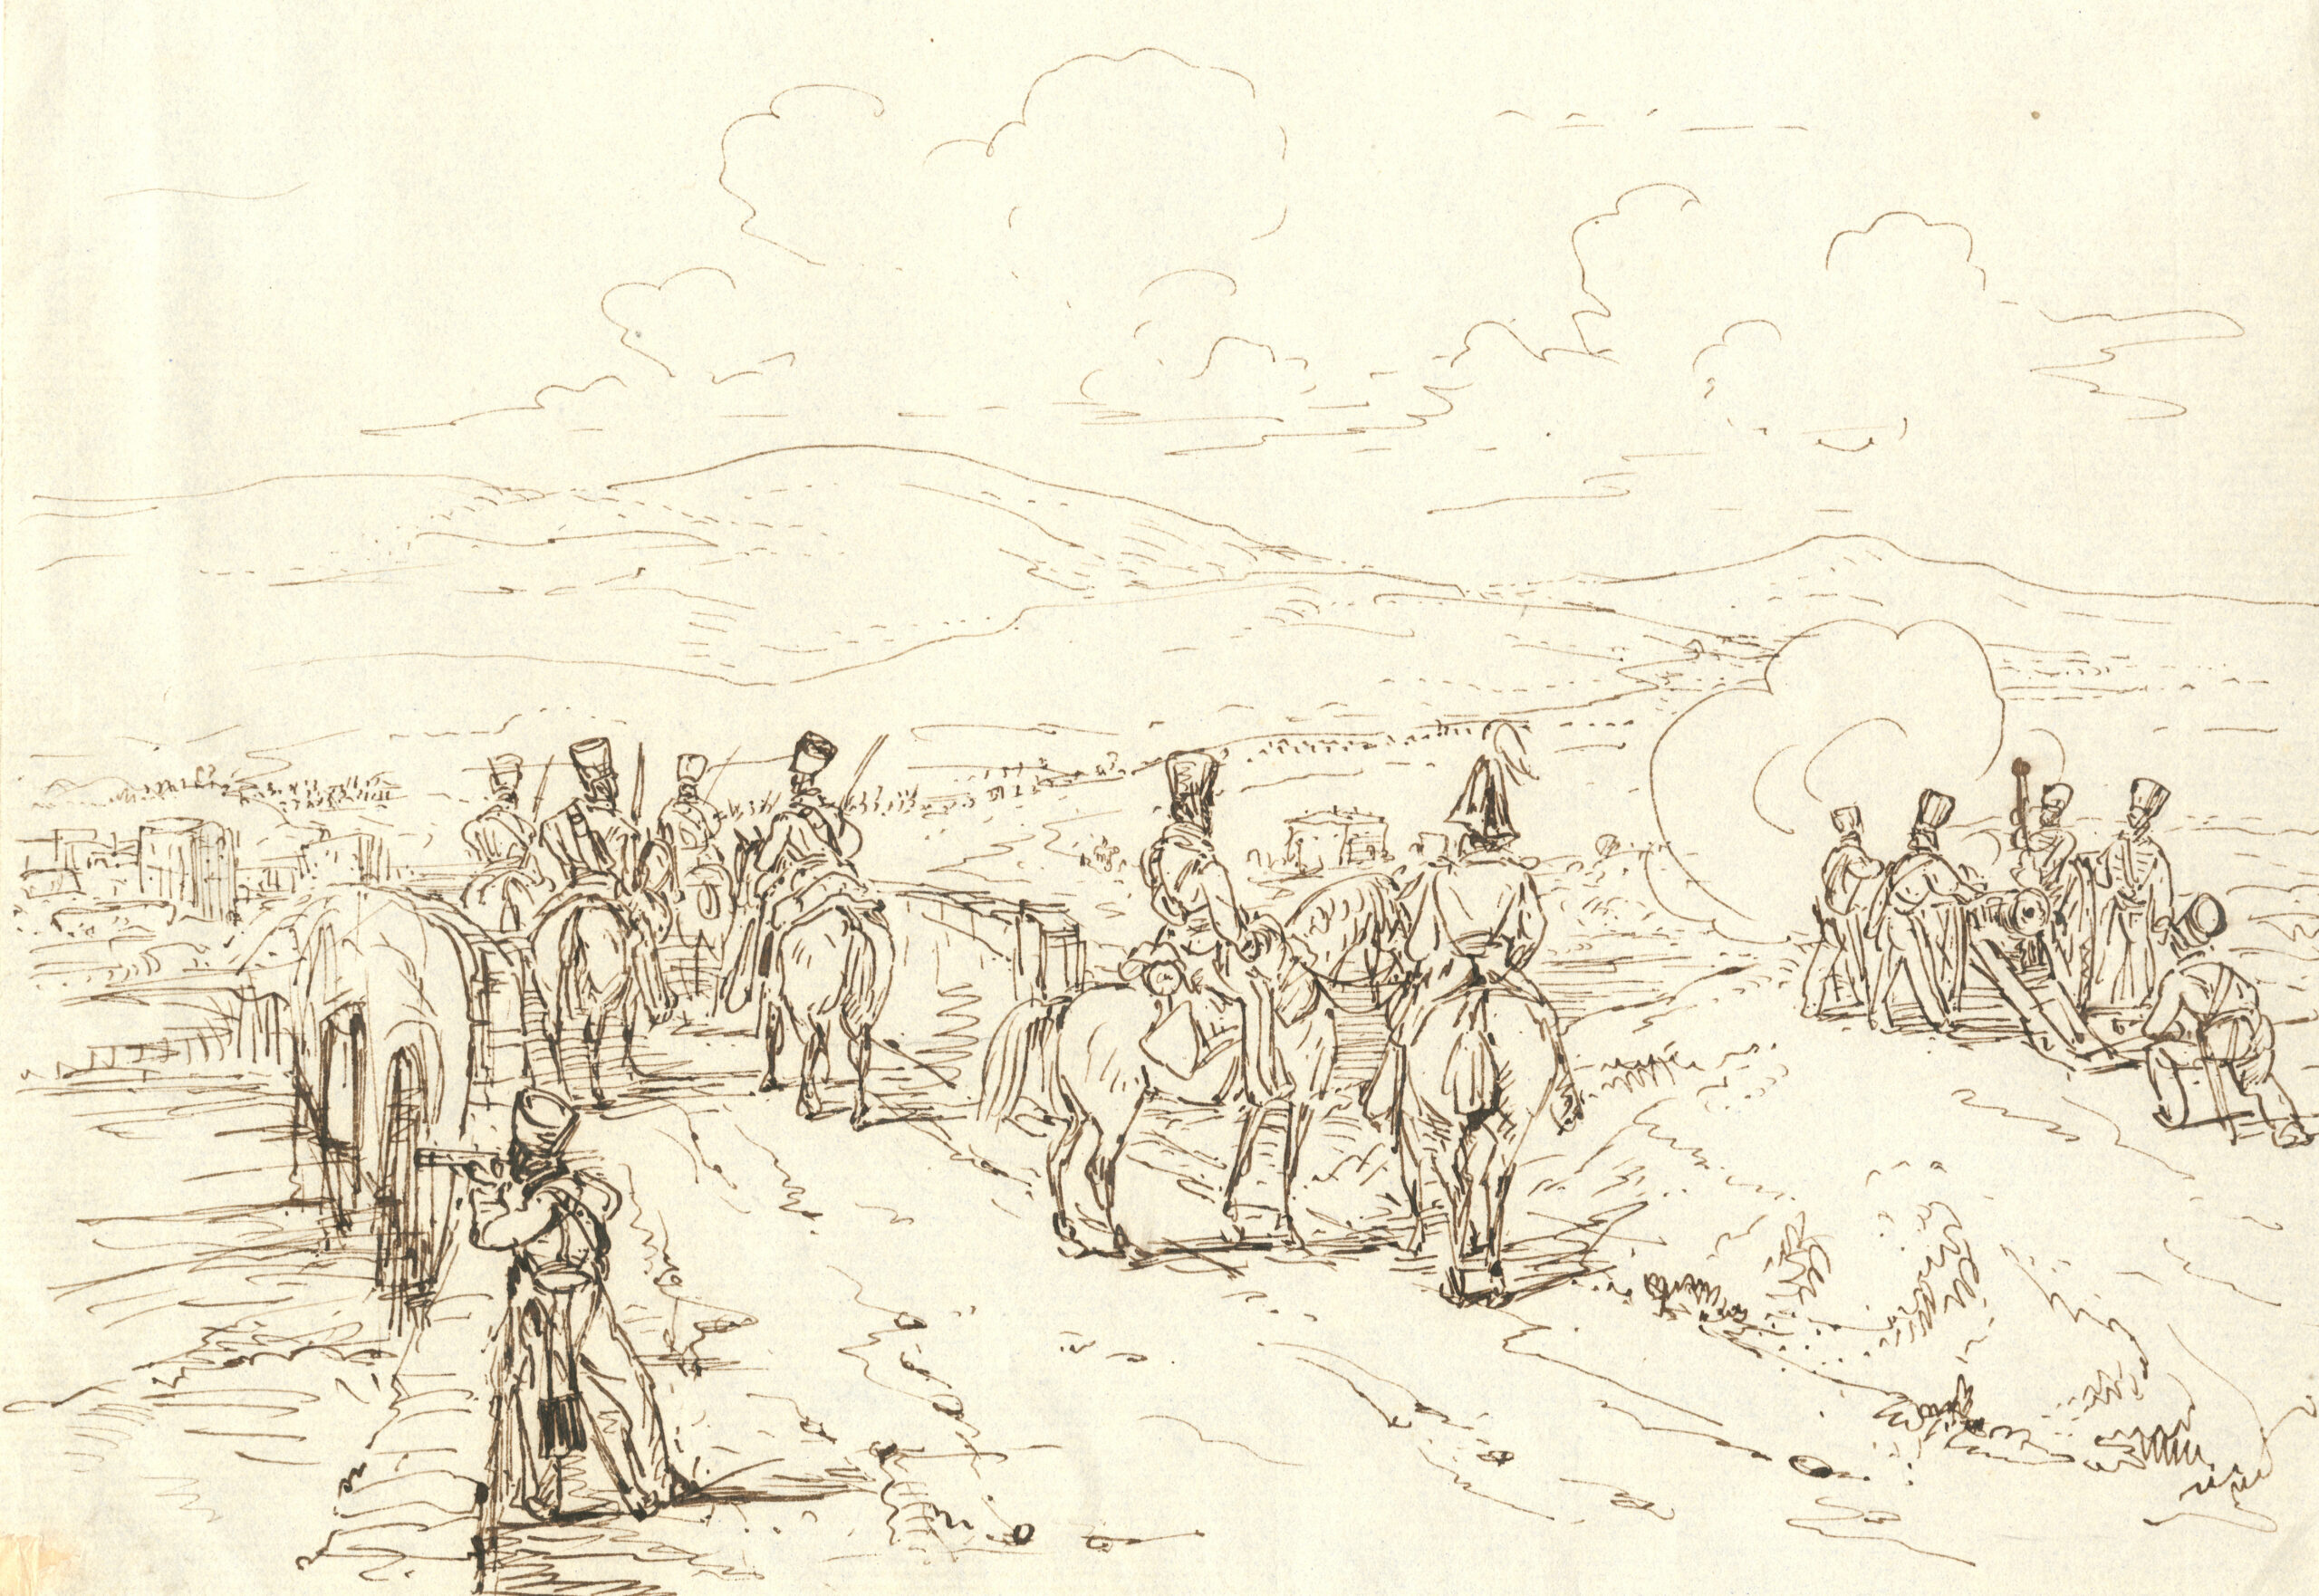 British light cavalry watch and their field artillery fires on the French during the Waterloo campaign